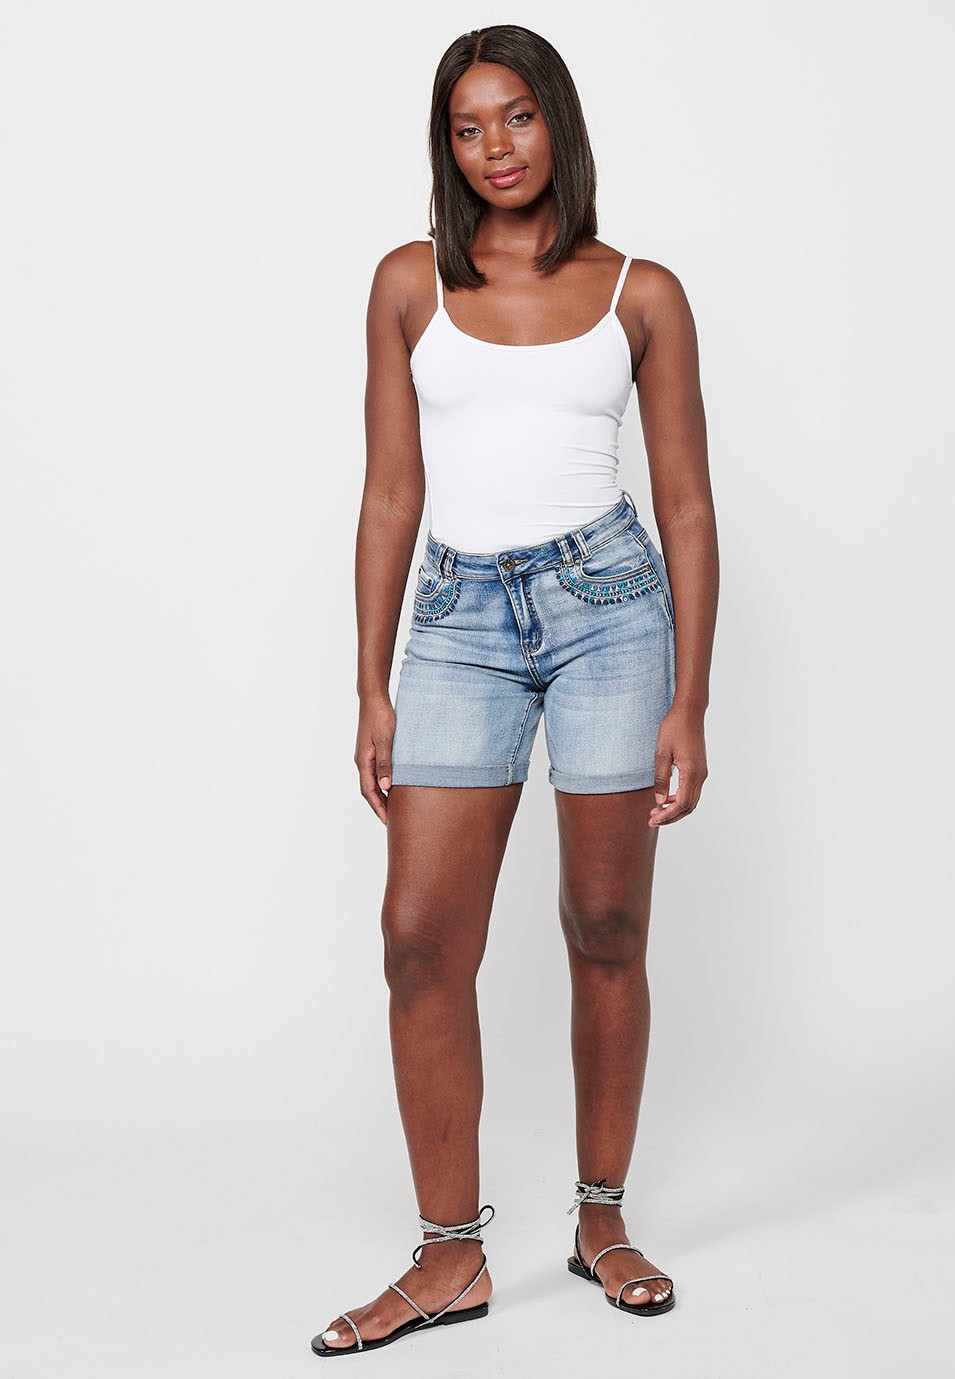 Blue Denim Shorts with Embroidered Details and Front Closure with Zipper and Button for Women